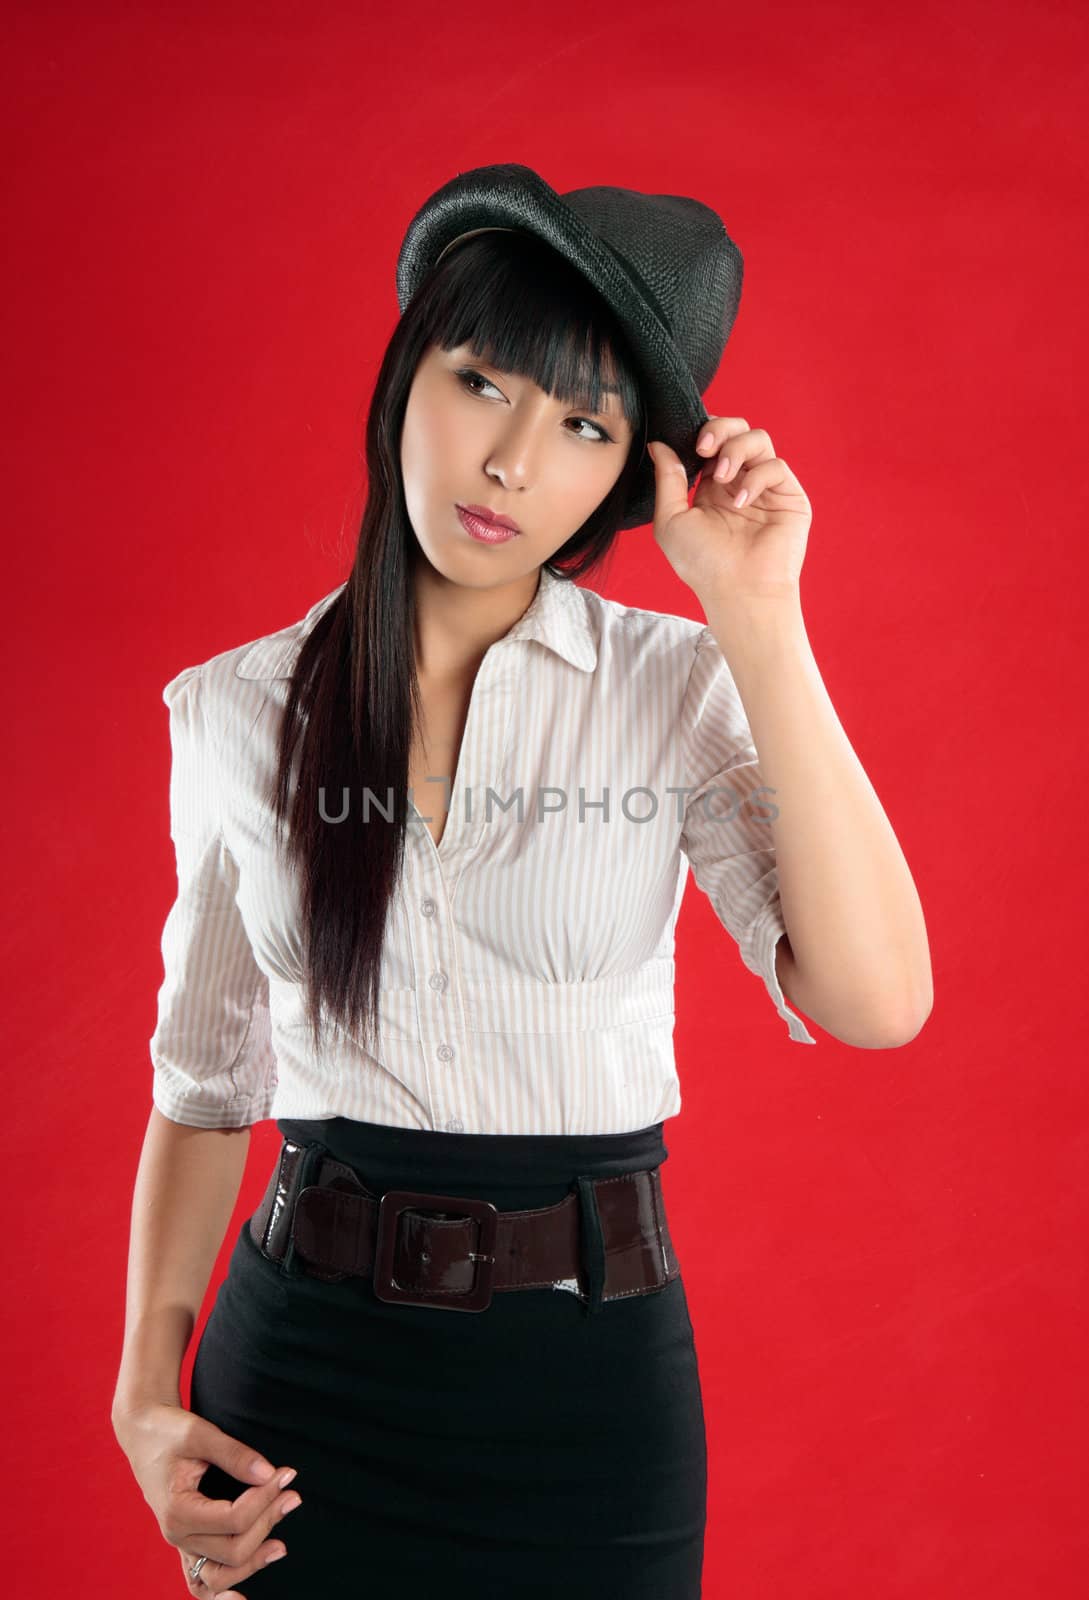 Young pretty woman wearing a beige white striped blouse, black skirt and hat.  She is looking sideways and is tilting her head slightly.